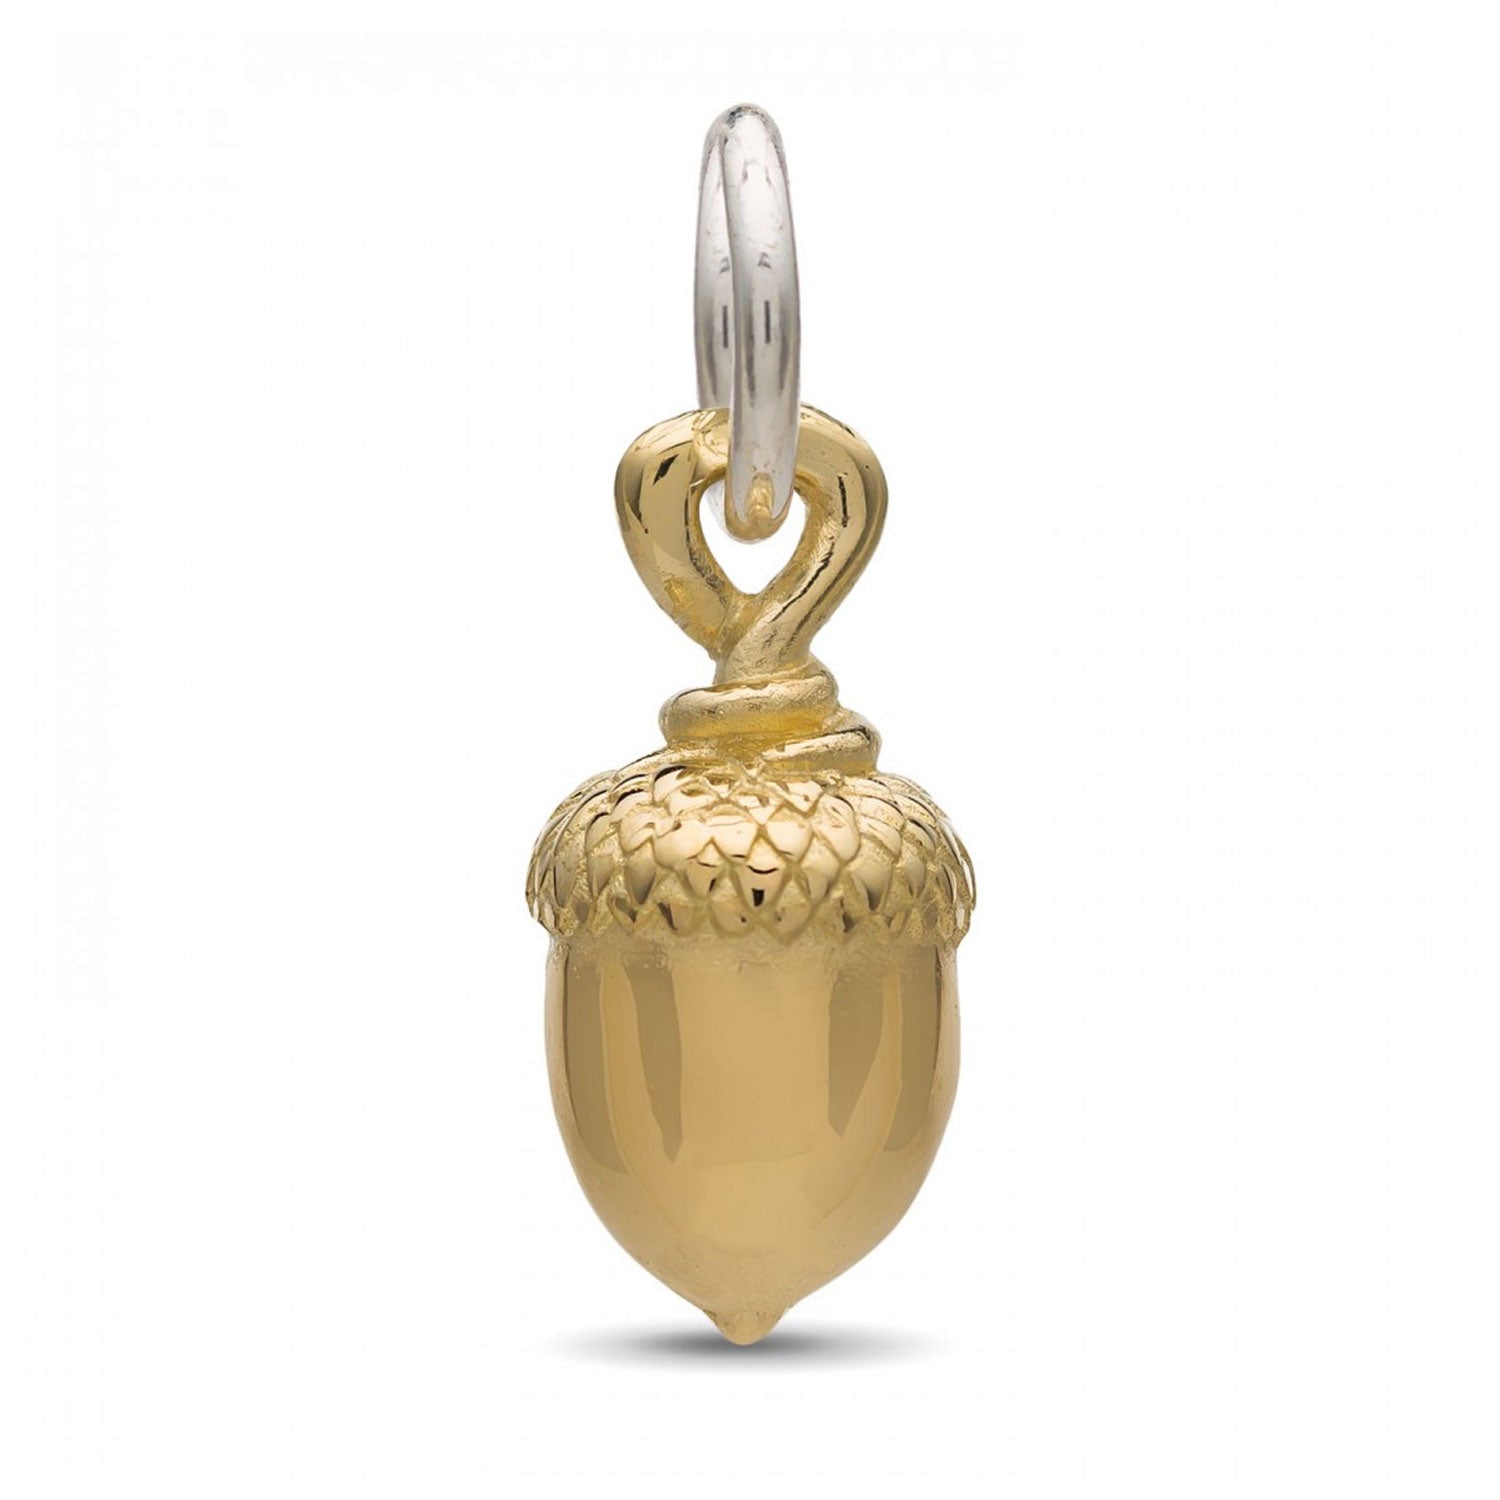 Solid gold acorn charm for bracelets and necklaces by Scarlett Jewellery